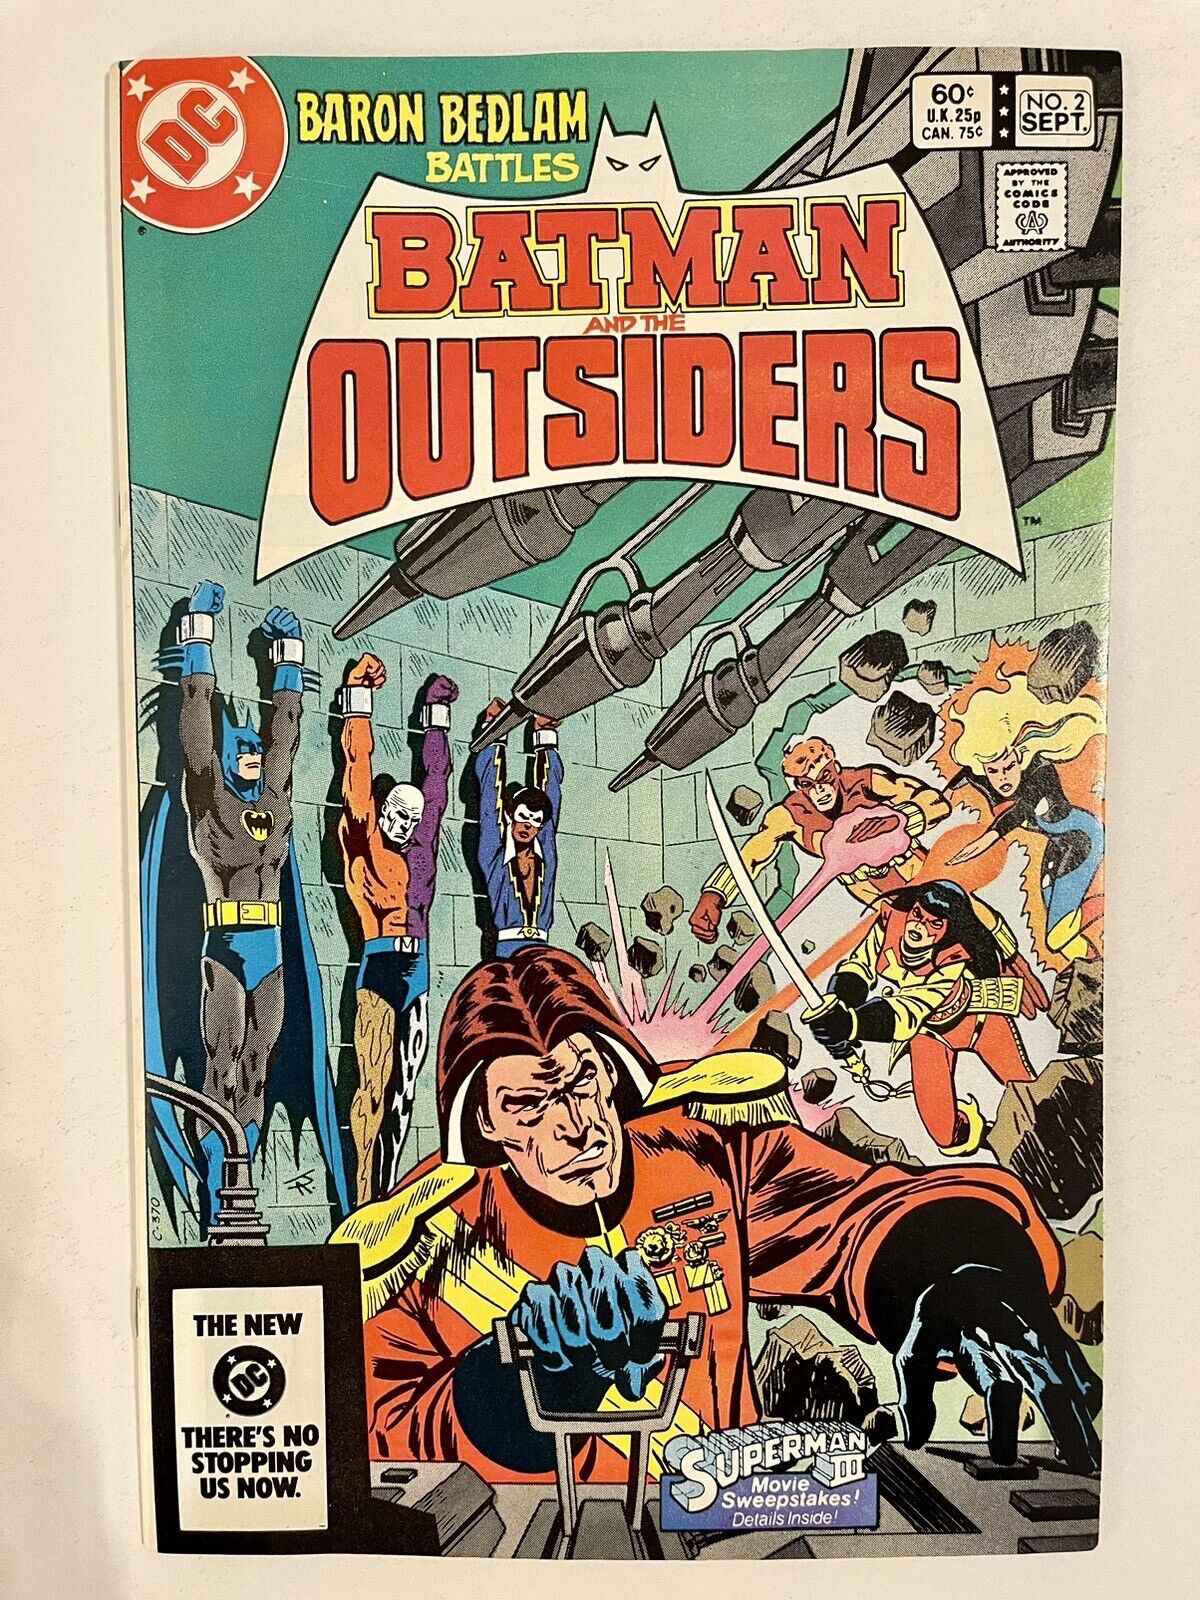 Batman and The Outsiders #2, 1983 Bronze Age DC Comic Book, 1st Appearance